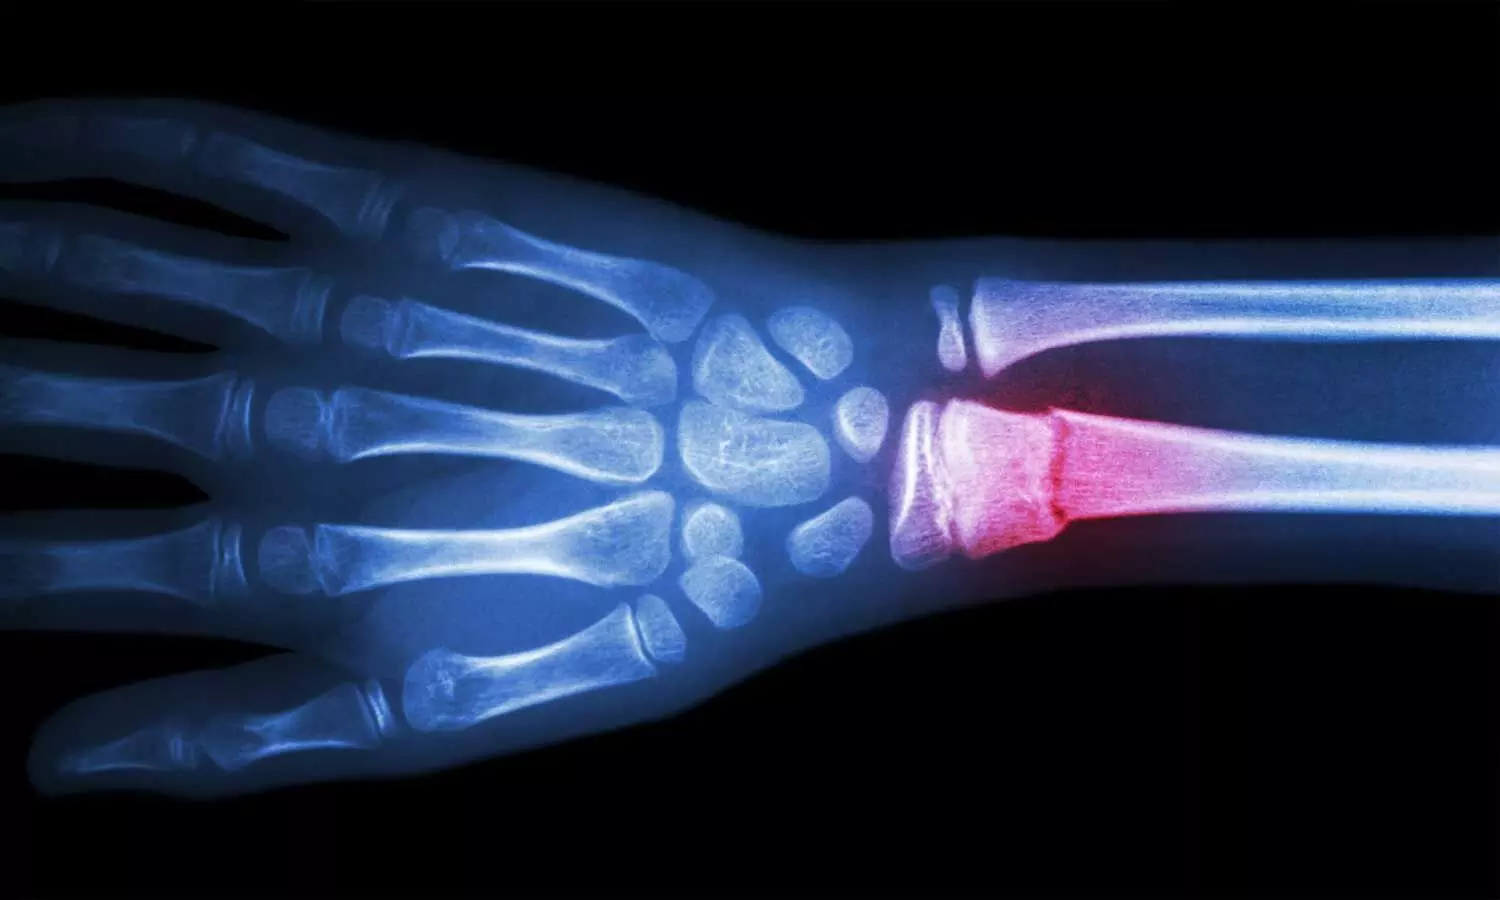 Coupling antibiotics with stem cells may effectively fight bone implant infections